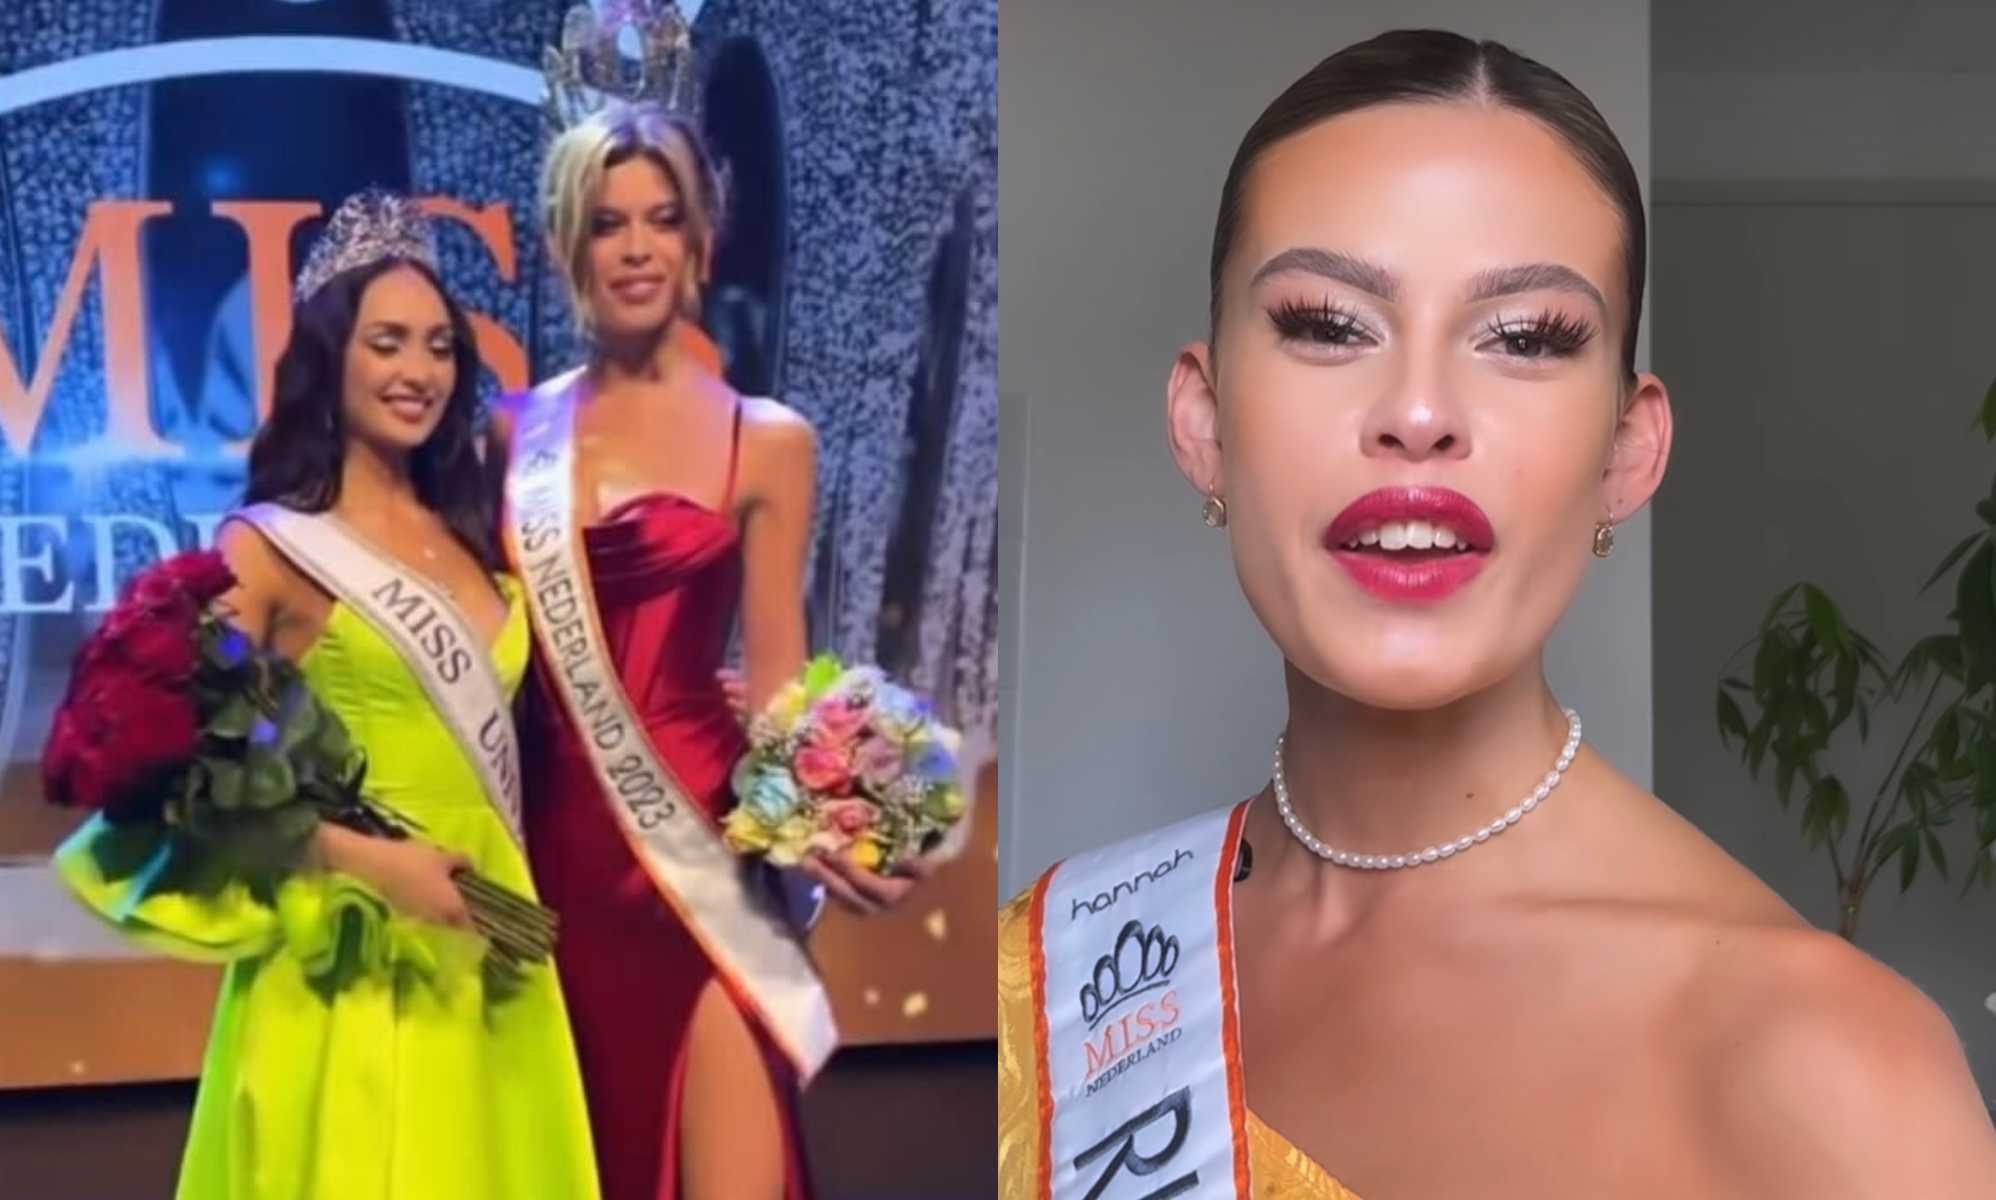 A trans woman is the winner of Miss Netherlands 2023. Afpkudos